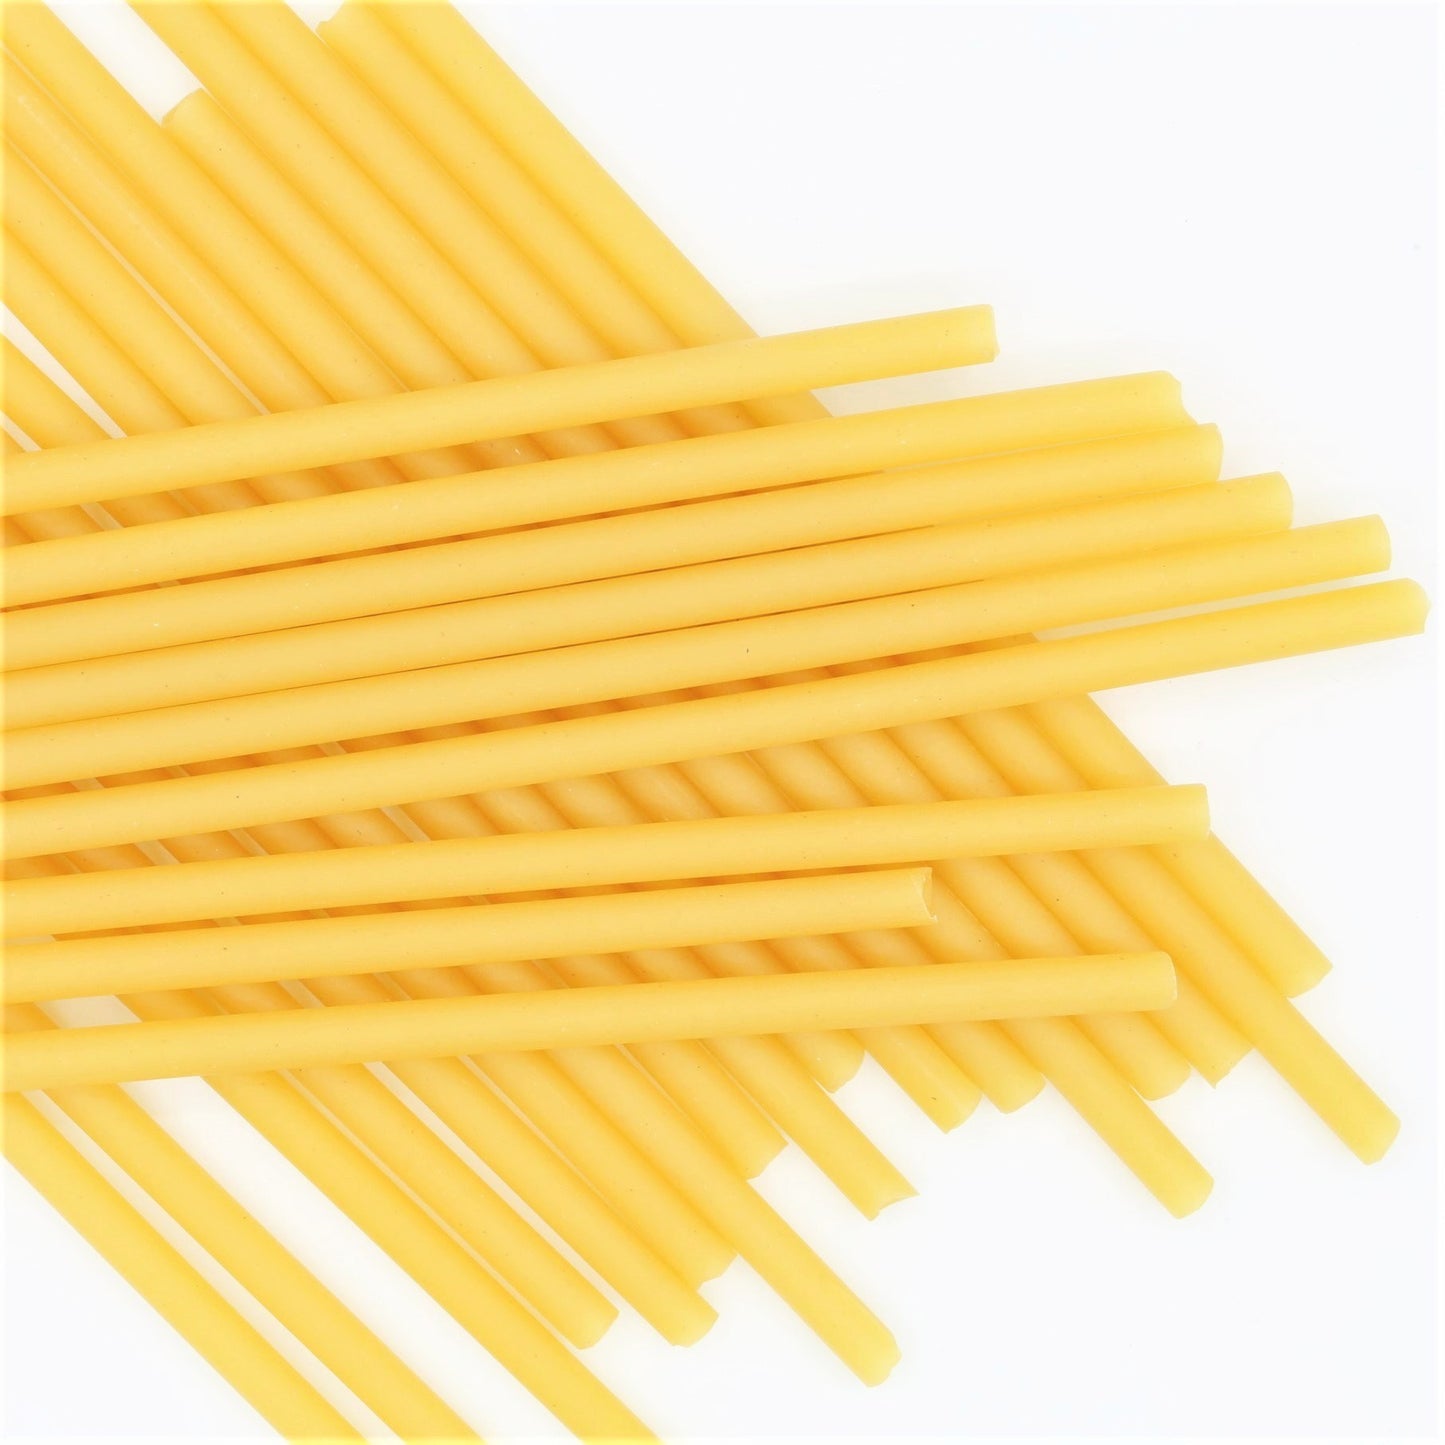 pasta straws from the top